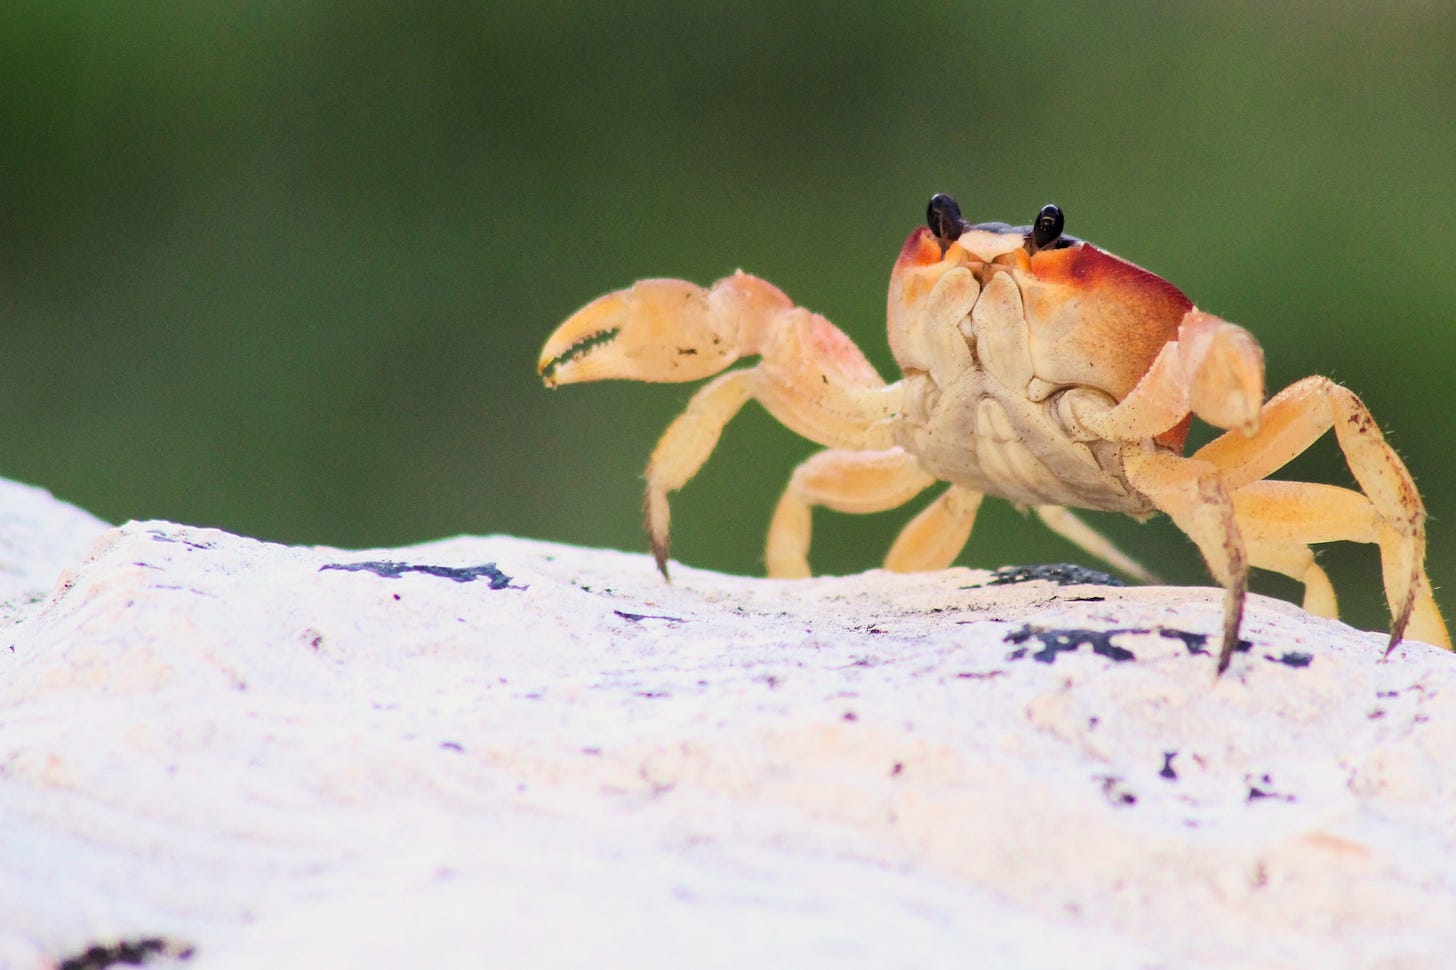 A cute tan and red crab is seen face-on at an angle, spreading its legs across what looks like sand.